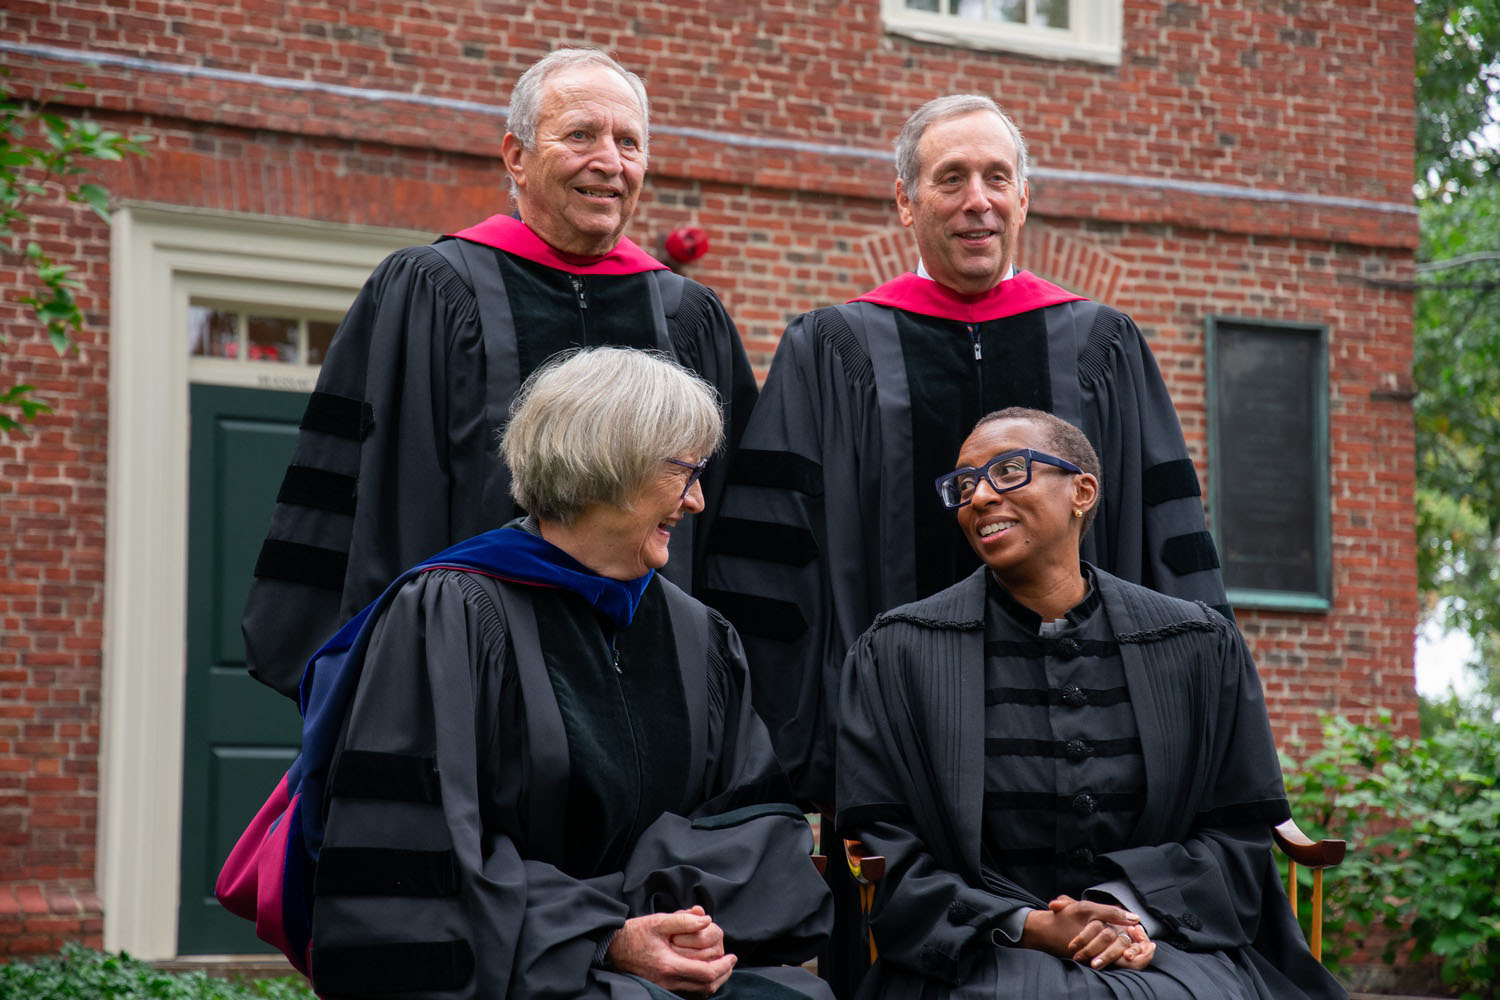 Before the festivities for the inauguration of Claudine Gay, Harvard’s four most recent presidents posed for a photo in front of Massachusetts Hall. From top to bottom, left to right: Lawrence H. Summers, Lawrence S. Bacow, Drew Gilpin Faust, and then University President Claudine Gay.